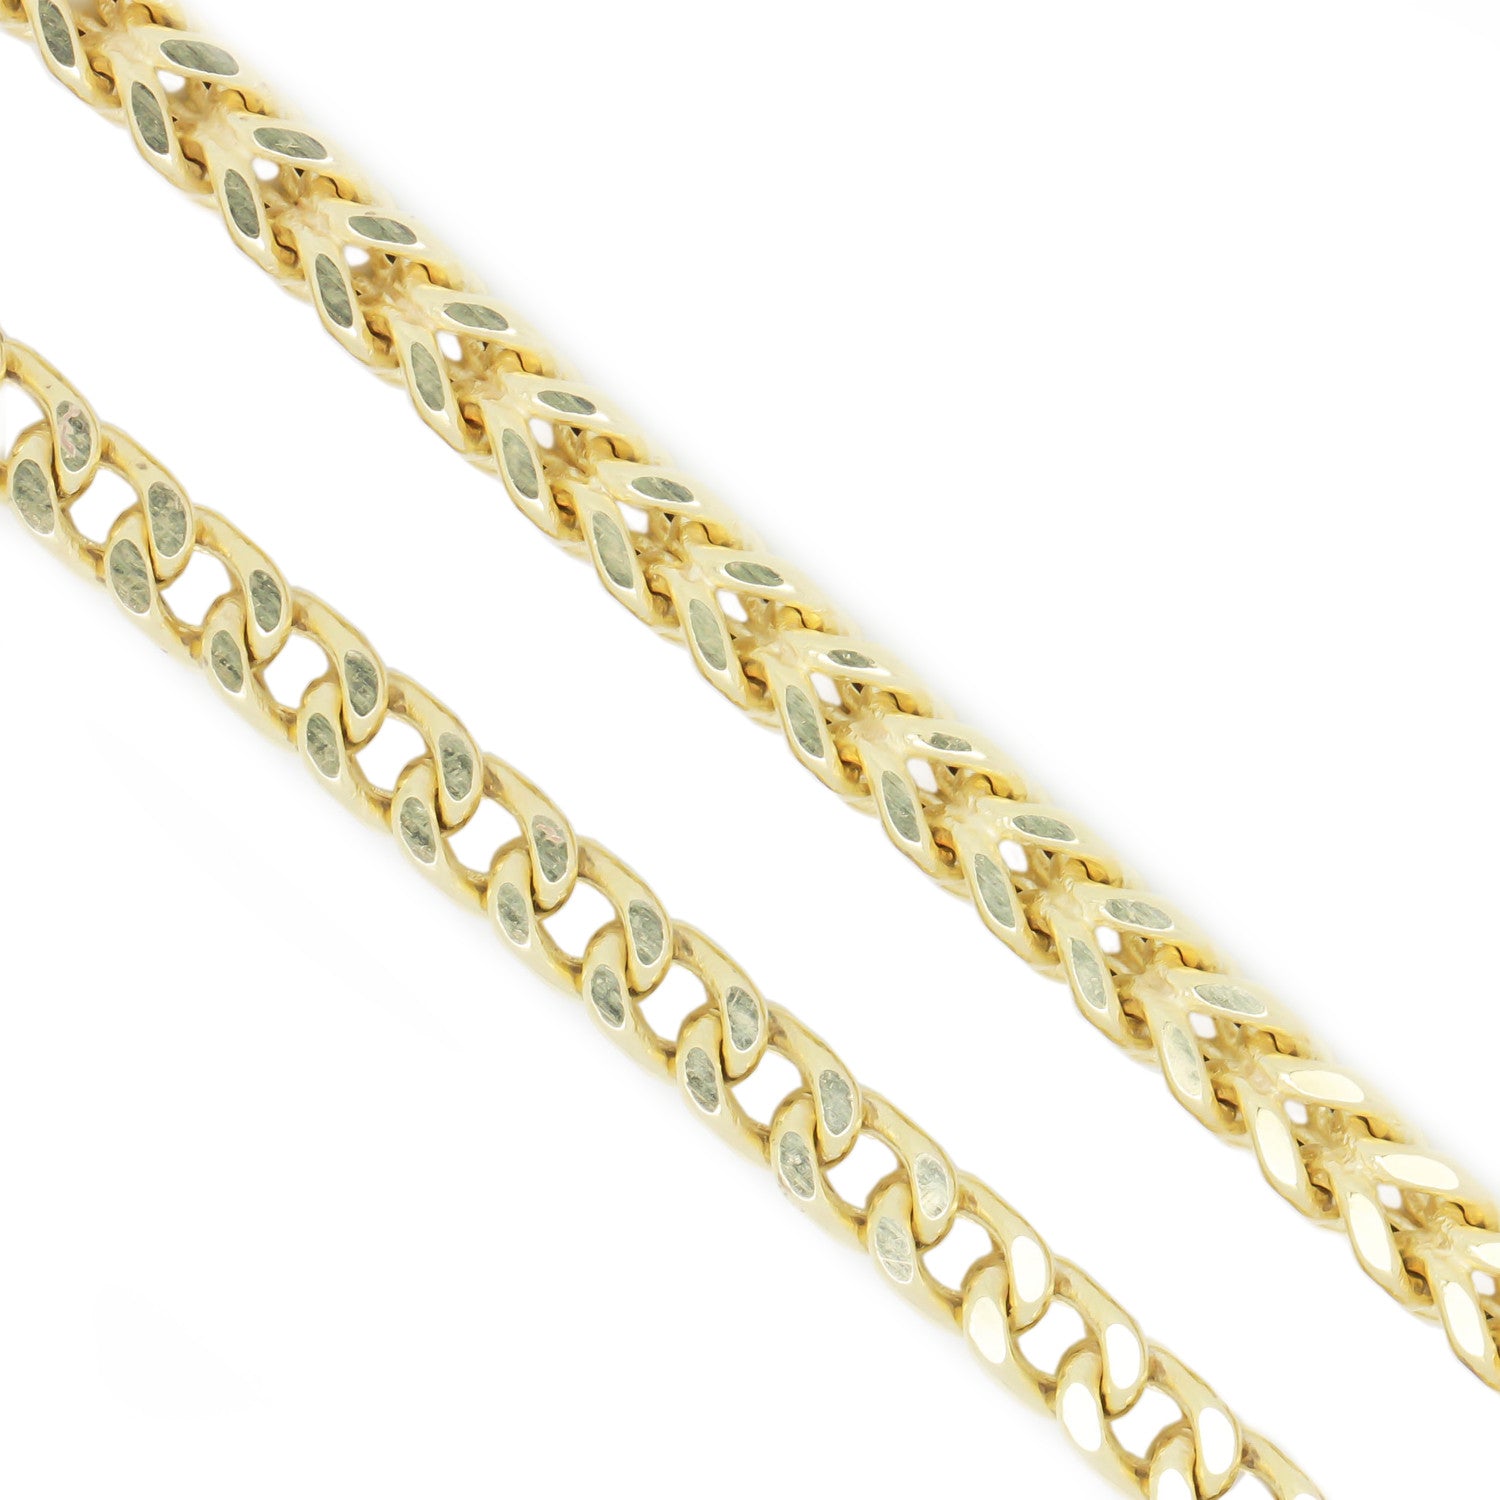 10K Yellow Gold 3.0 mm Franco Chain Necklace 30 Inches Diamond Cut